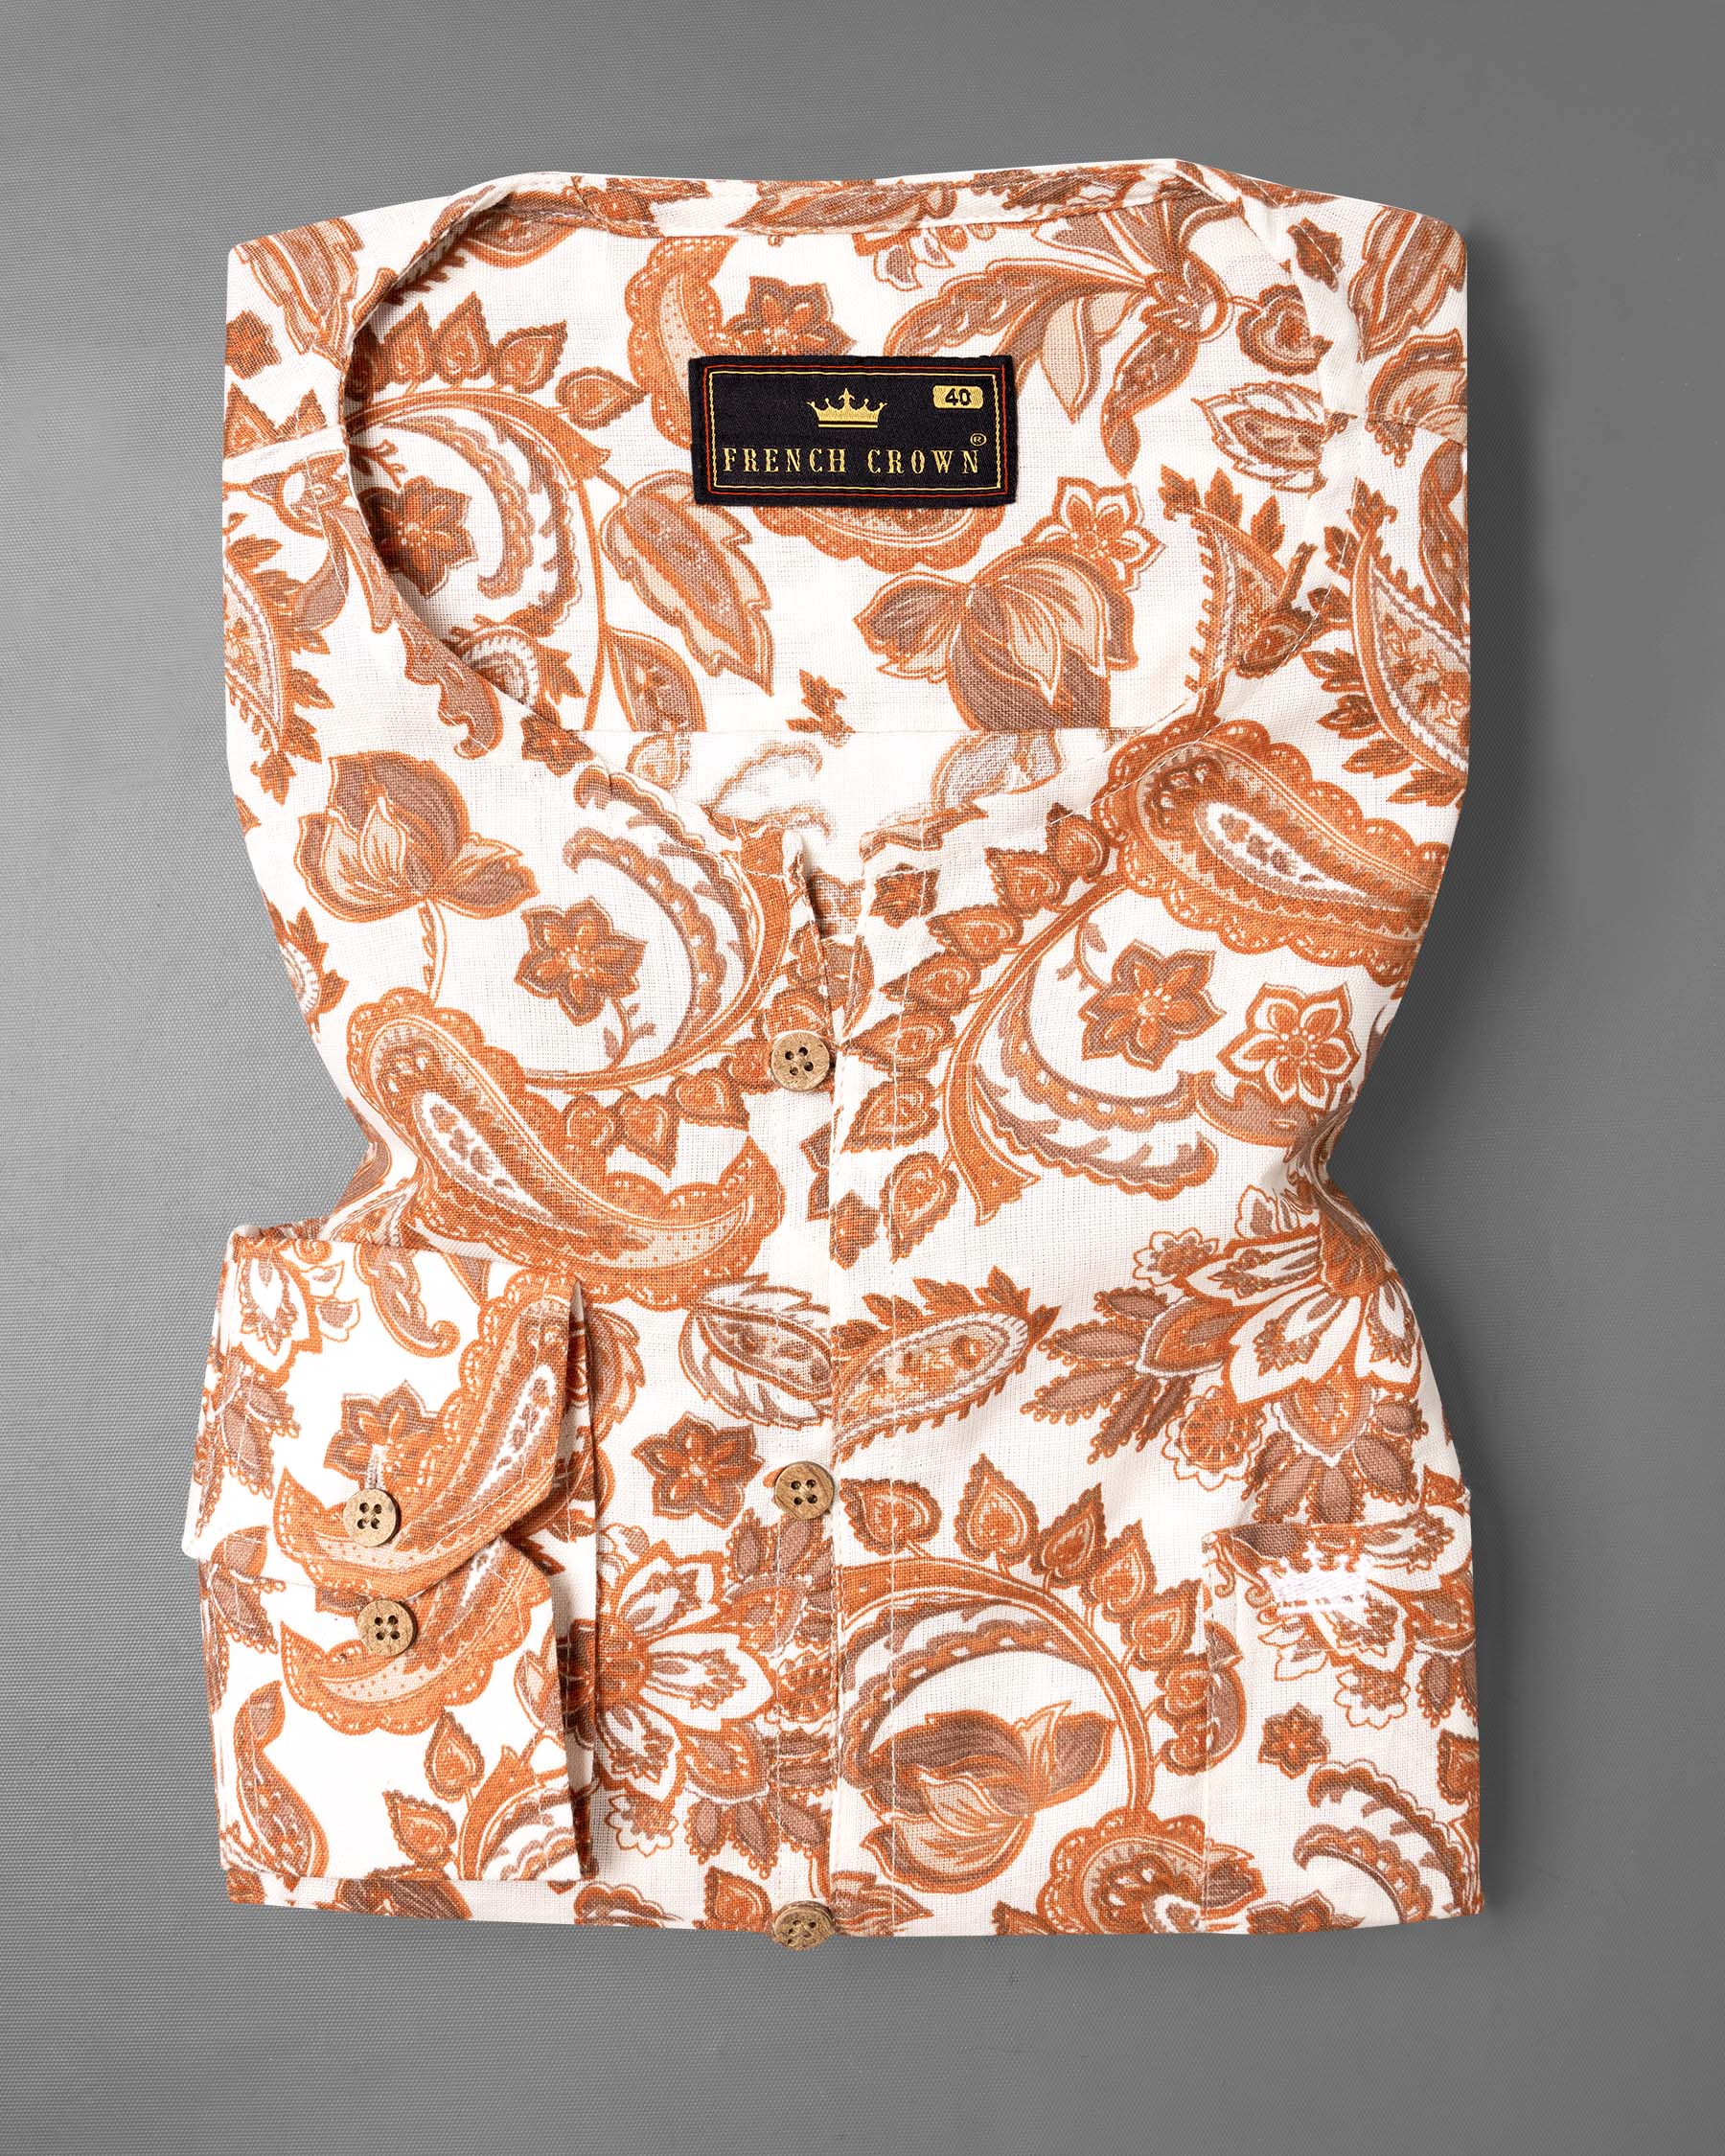 White Lilac and Pale Brown Paisley and Floral Printed Luxurious Linen Kurta Shirt 6844-WOC-38,6844-WOC-38,6844-WOC-39,6844-WOC-39,6844-WOC-40,6844-WOC-40,6844-WOC-42,6844-WOC-42,6844-WOC-44,6844-WOC-44,6844-WOC-46,6844-WOC-46,6844-WOC-48,6844-WOC-48,6844-WOC-50,6844-WOC-50,6844-WOC-52,6844-WOC-52